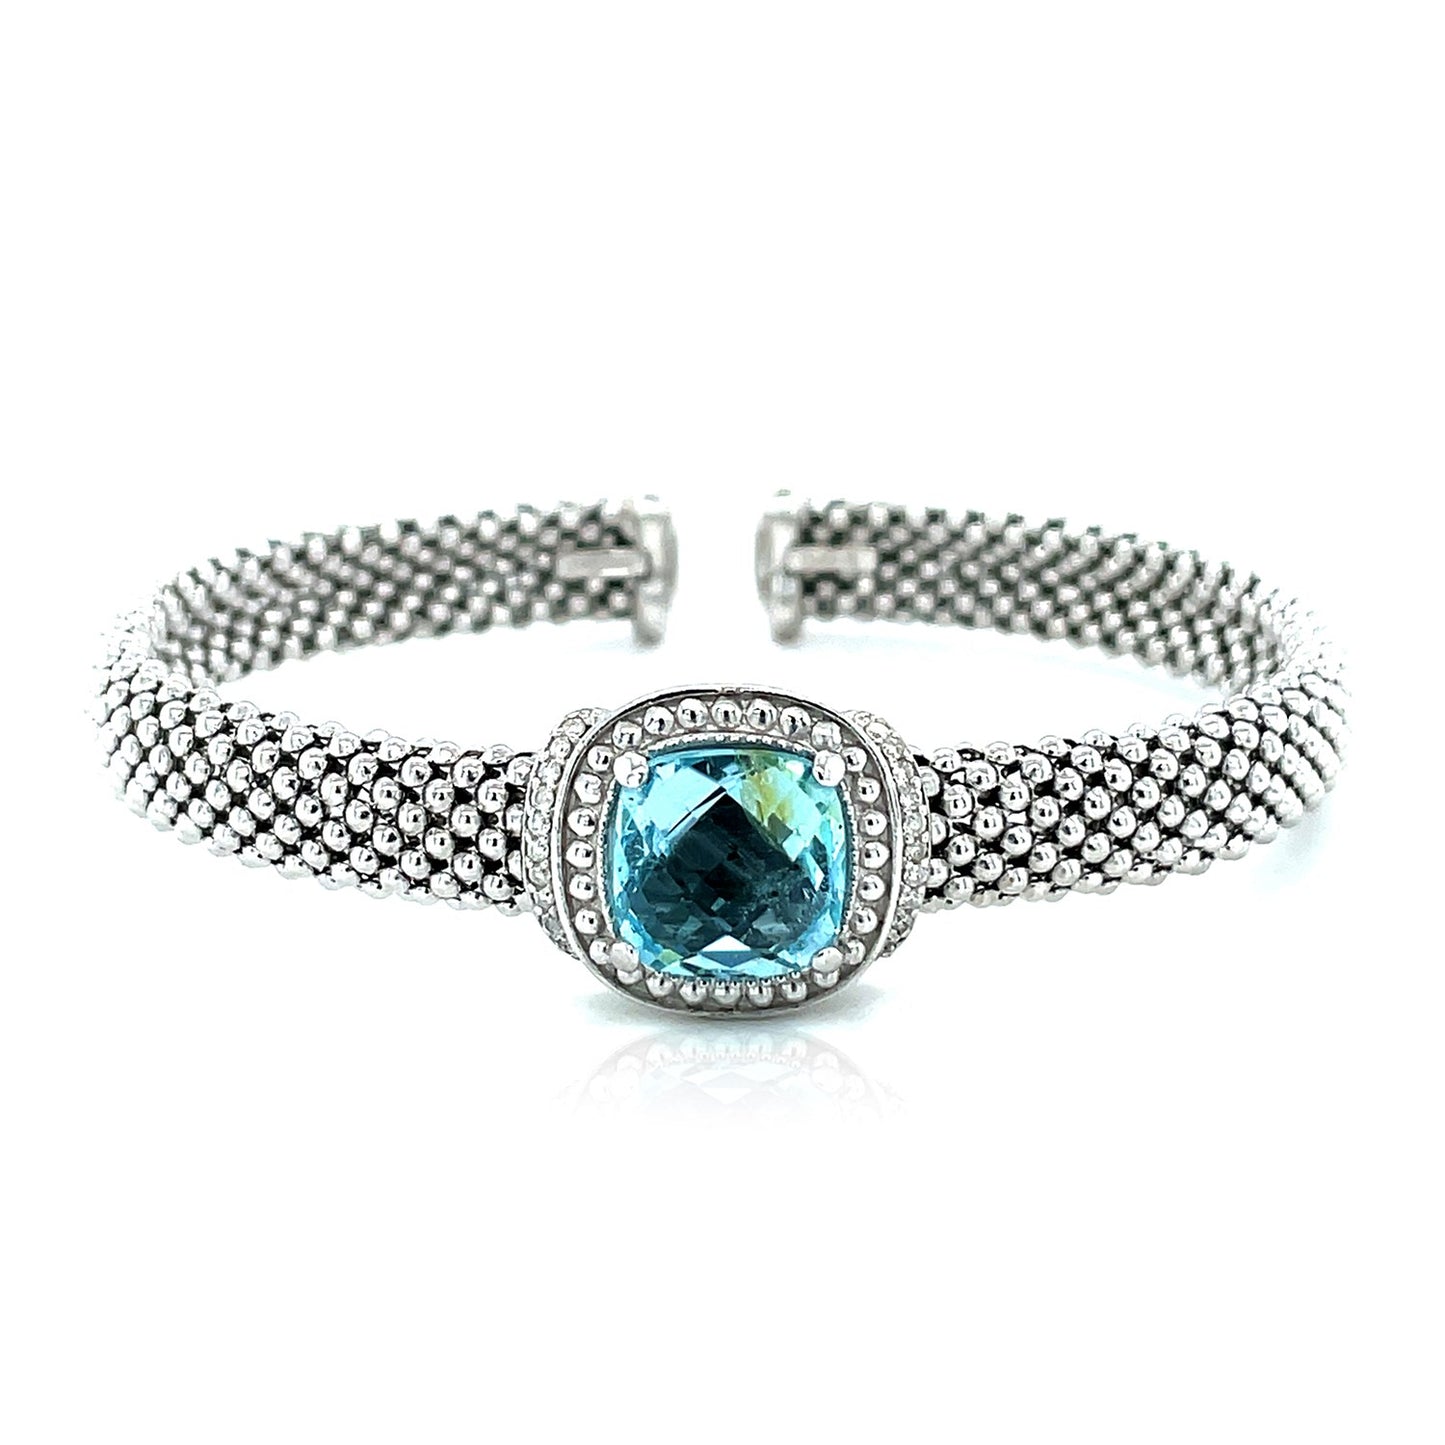 Popcorn Texture Cuff Bangle with Blue Topaz and Diamonds in Sterling Silver